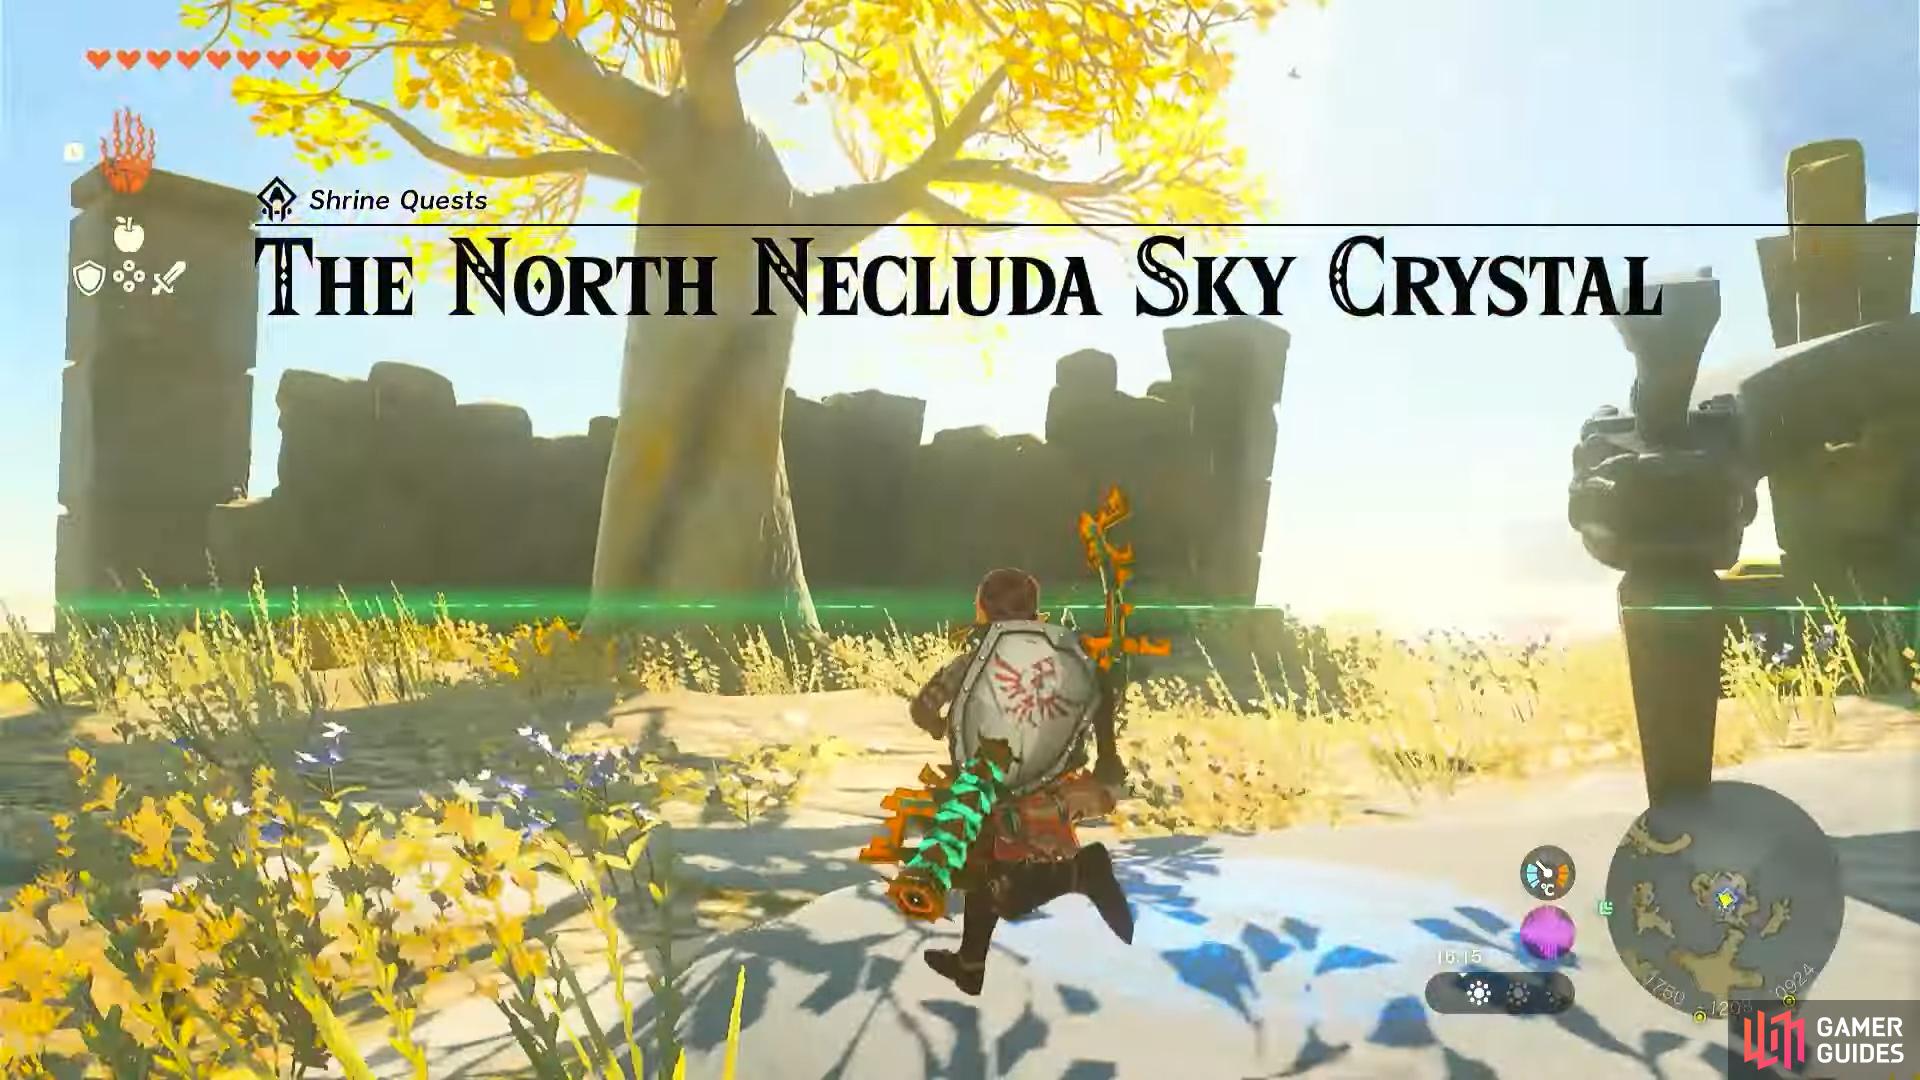 Starting The North Necluda Sky Crystal Shrine Quest